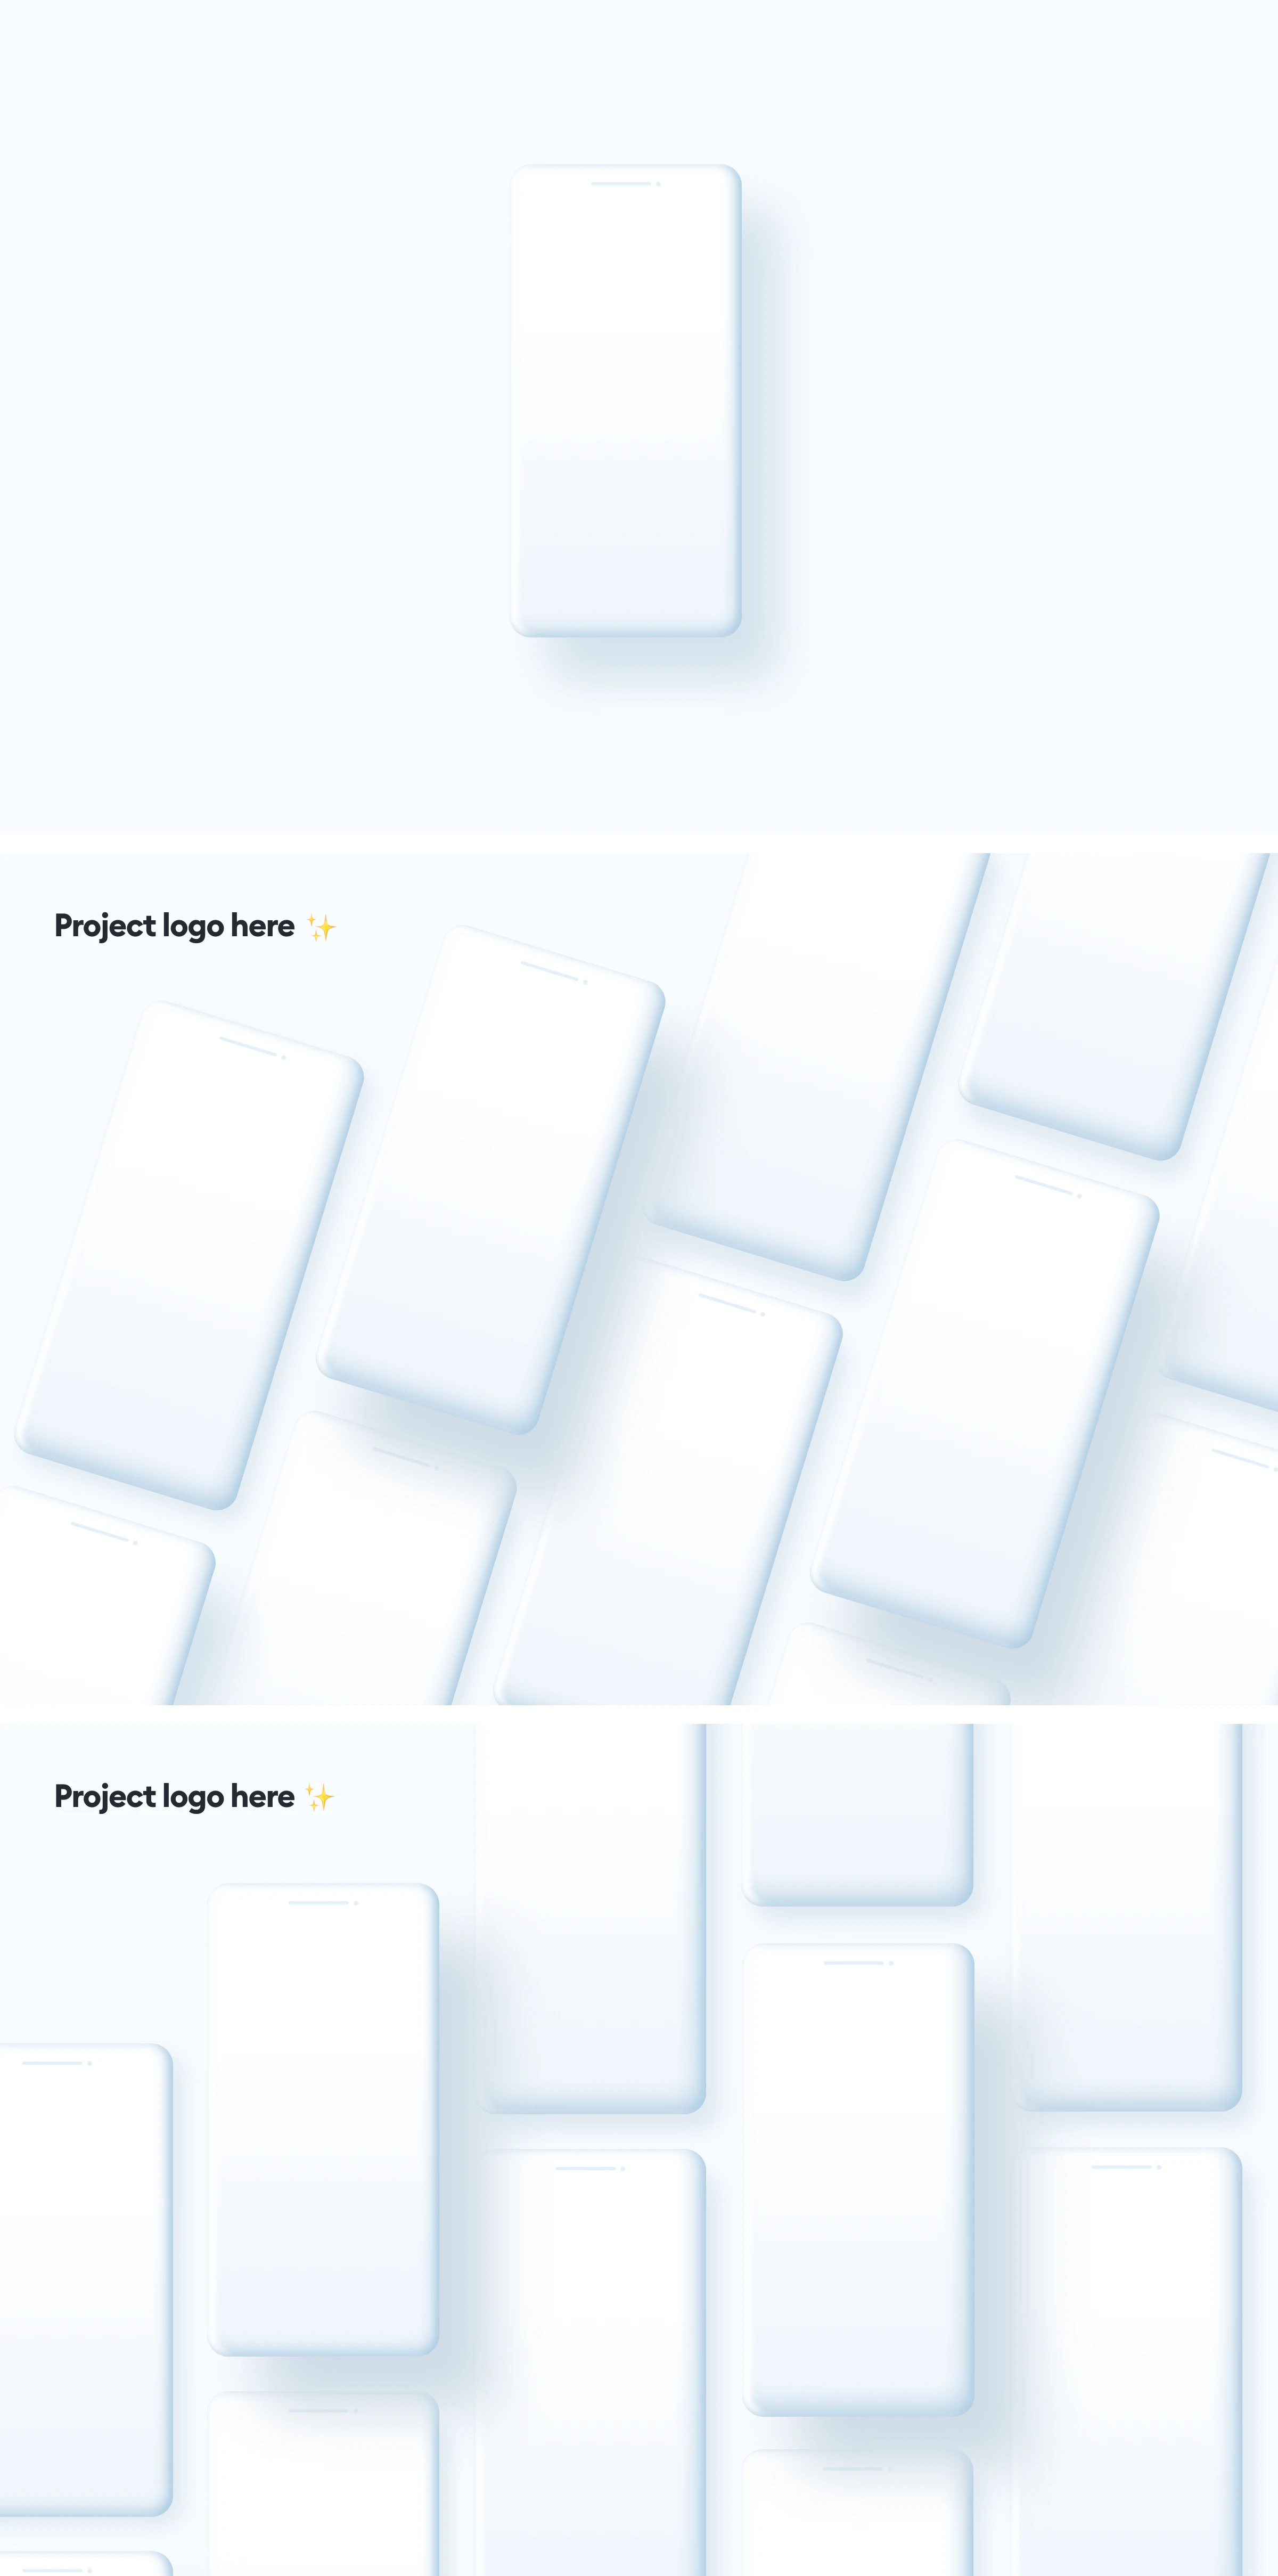 Free iPhone 12 Clay Mockups for Sketch and Figma - Simple, minimal, super-clean set of iPhone 12 clay mockups from Hype4Academy. We've been asked a lot about our custom, clay mockups, so here they are so you can use them as well in your project presentations